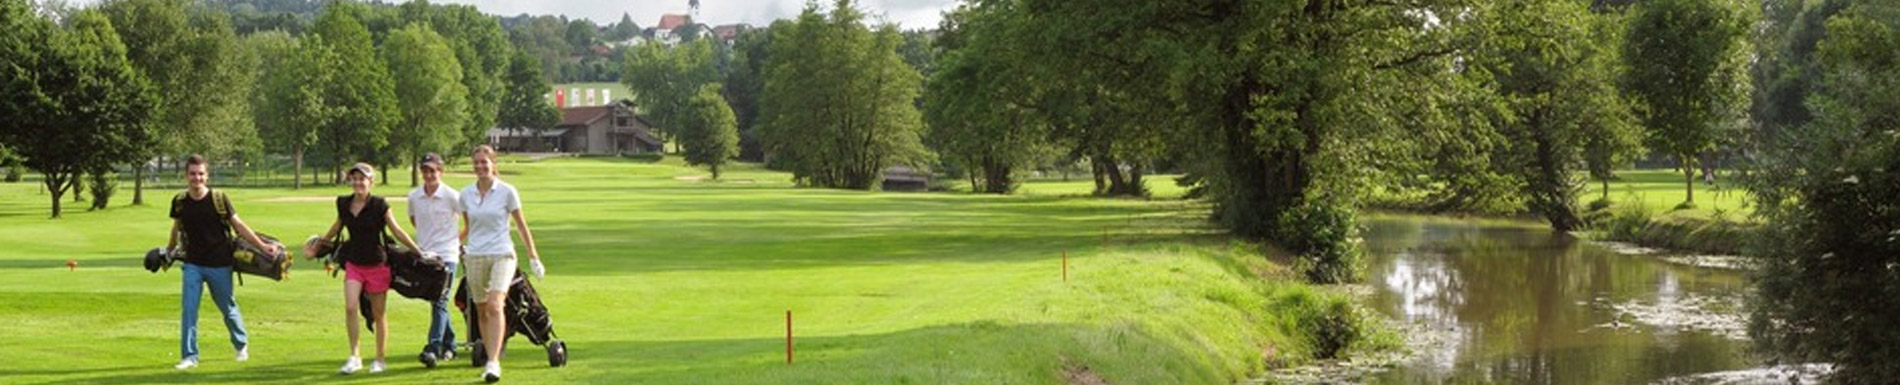 Rottaler Golf- & Country Club